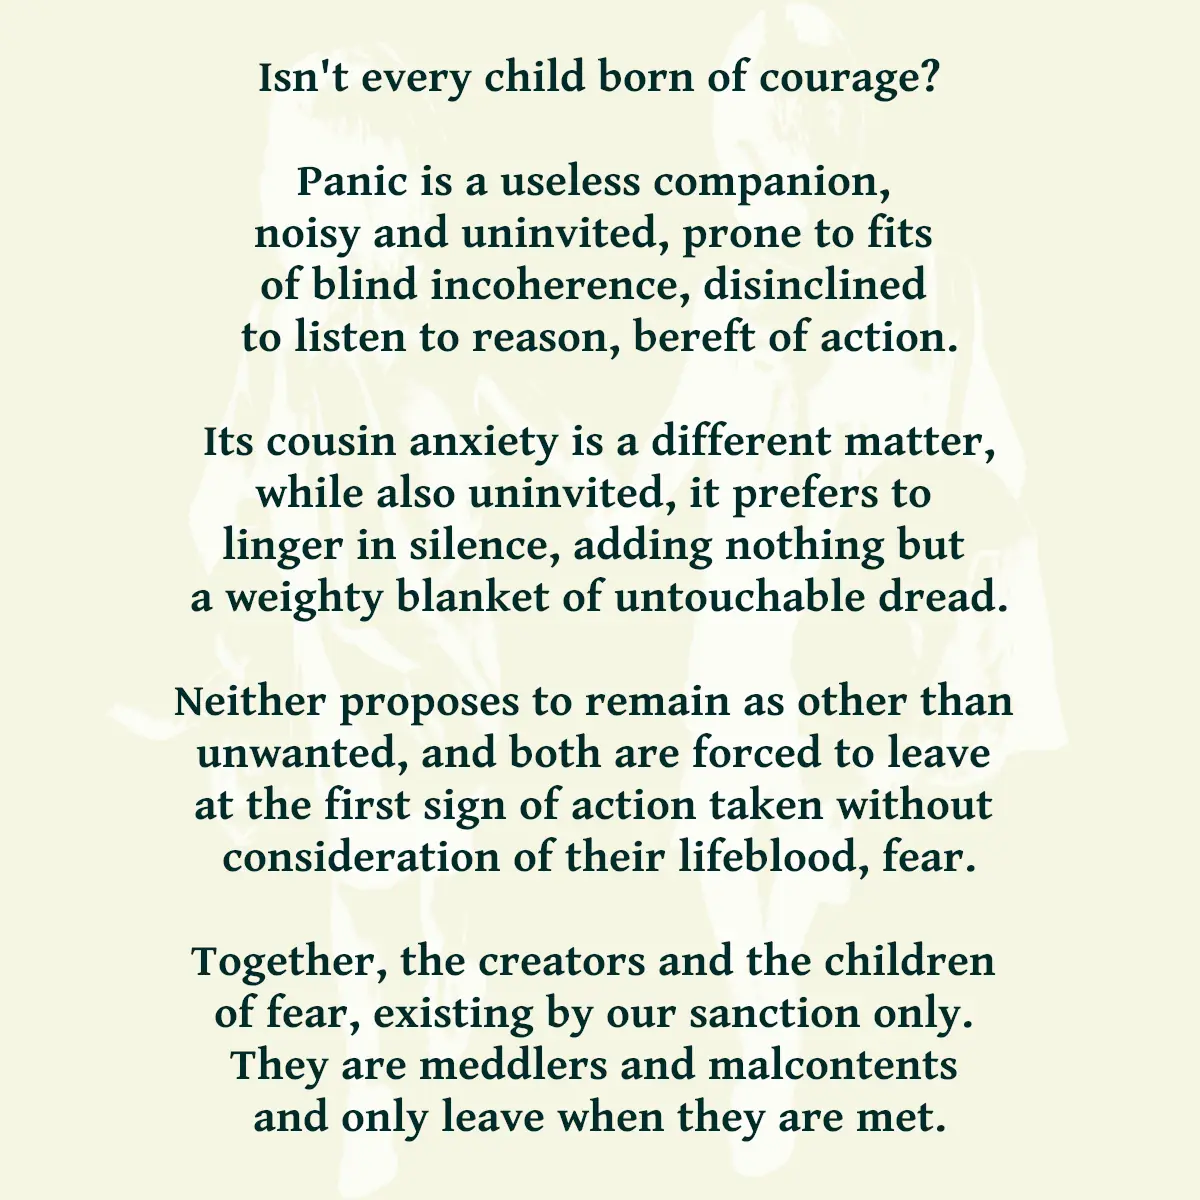 Isn't every child born of courage? Panic is a useless companion, noisy and uninvited, prone to fits of blind incoherence, disinclined to listen to reason, bereft of action. Its cousin anxiety is a different matter, while also uninvited, it prefers to linger in silence, adding nothing but a weighty blanket of untouchable dread. Neither proposes to remain as other than unwanted, and both are forced to leave at the first sign of action taken without consideration of their lifeblood, fear. Together, the creators and the children of fear, existing by our sanction only. They are meddlers and malcontents and only leave when they are met.